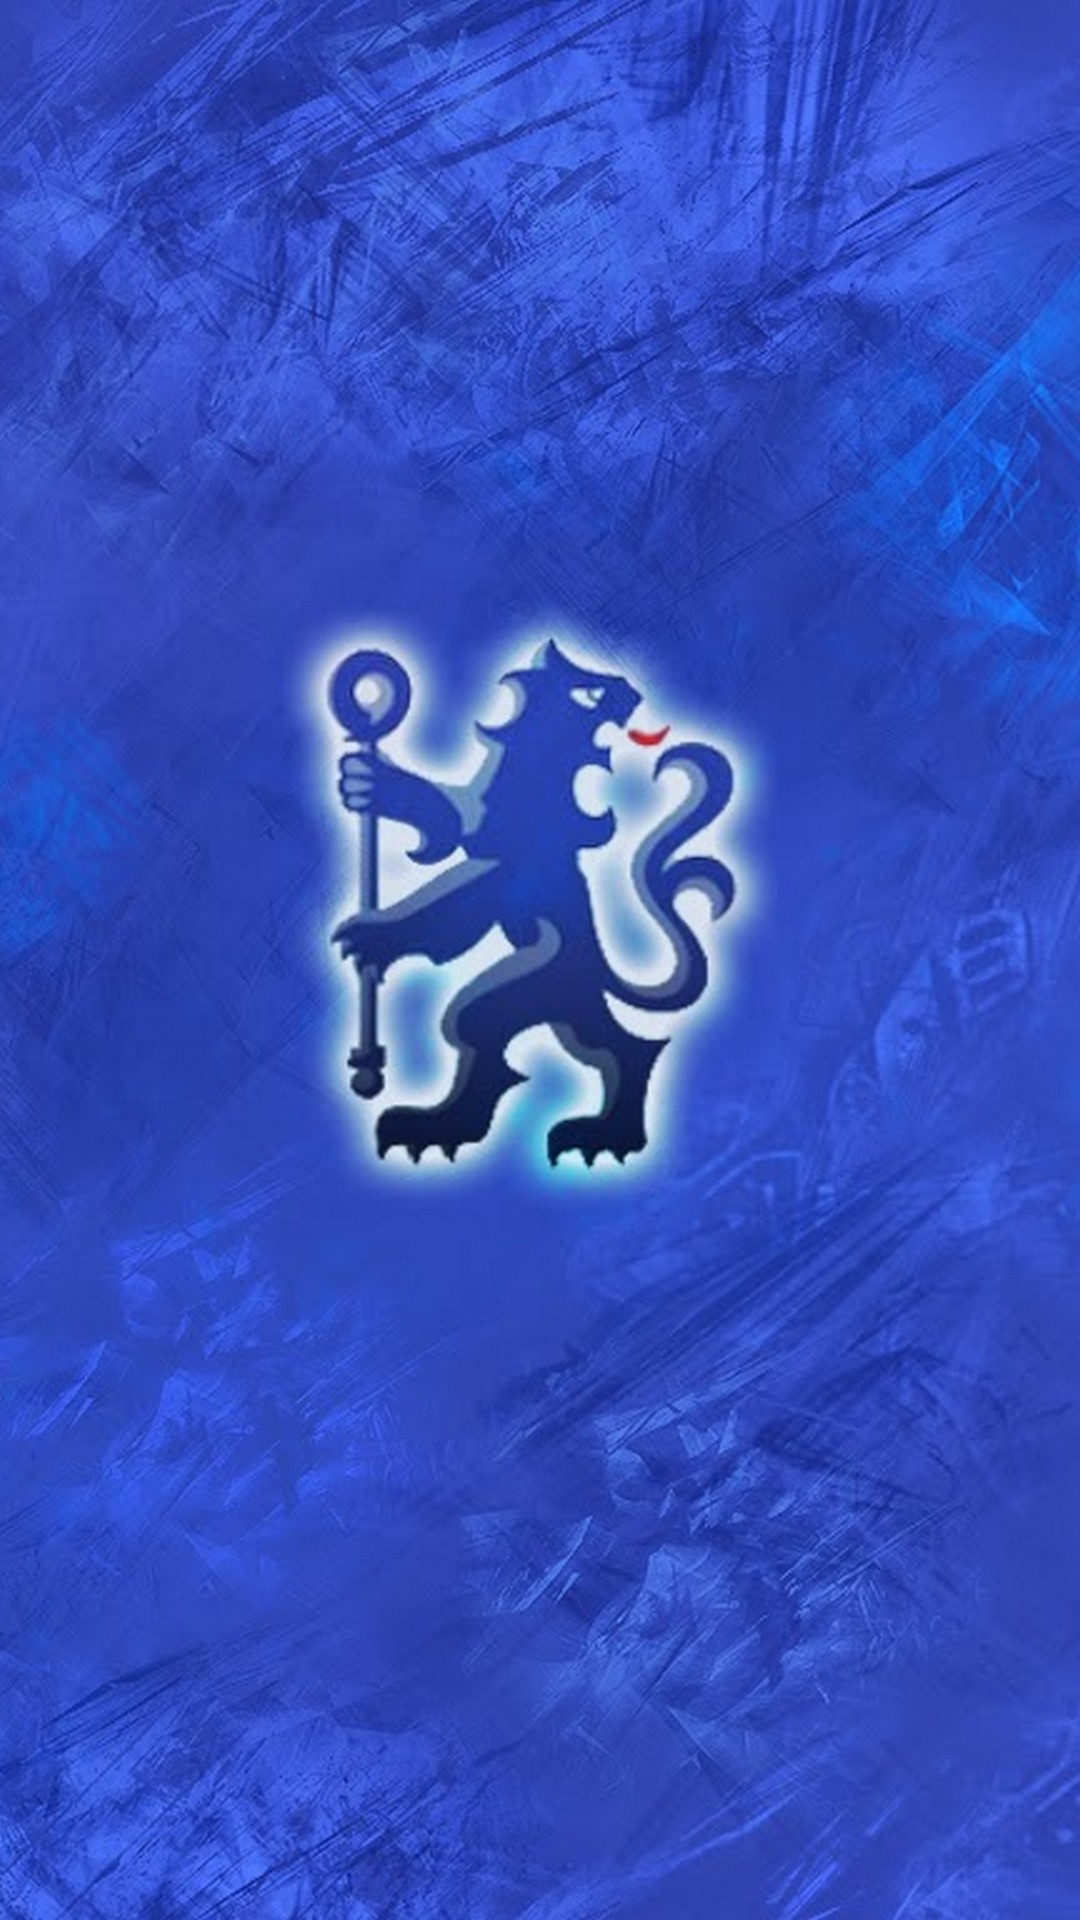 Chelsea Football Wallpaper iPhone HD with resolution 1080x1920 pixel. You can make this wallpaper for your Mac or Windows Desktop Background, iPhone, Android or Tablet and another Smartphone device